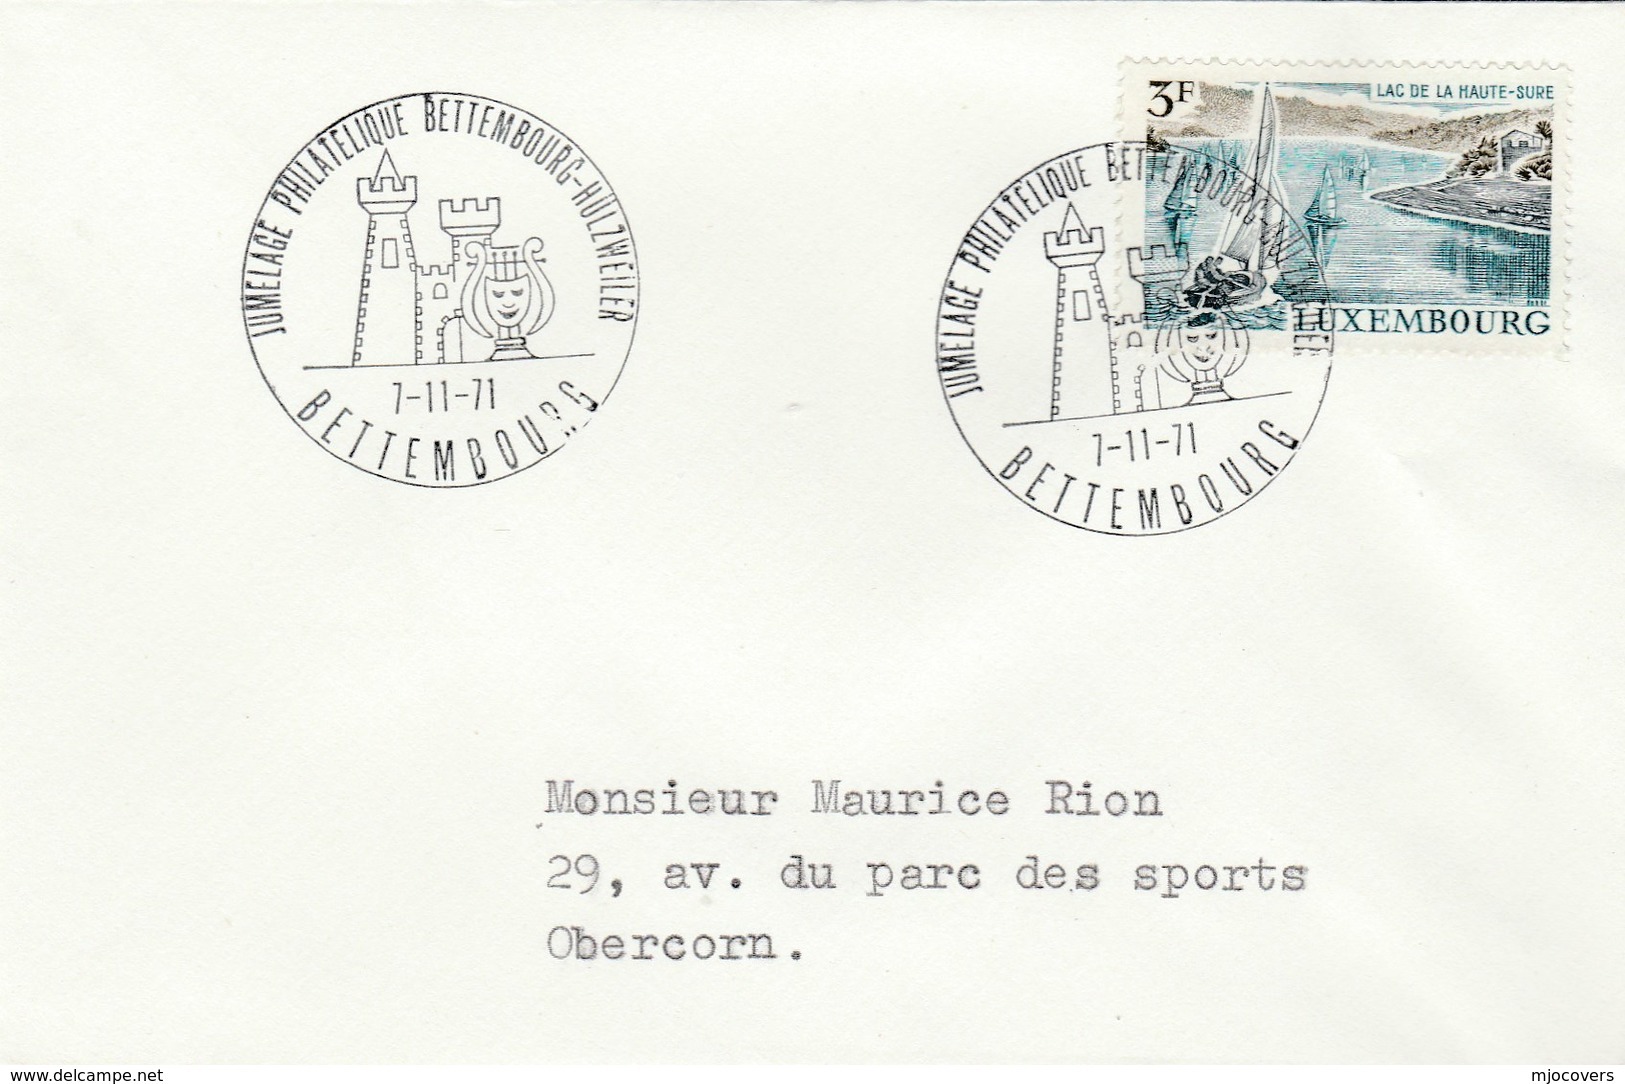 1971 Luxembourg TWINNING  EVENT COVER Pmk  BETTEMBOURG HULZWEILER , Franked 3f SAILING LAKE HAUTE SURE Sport - Covers & Documents